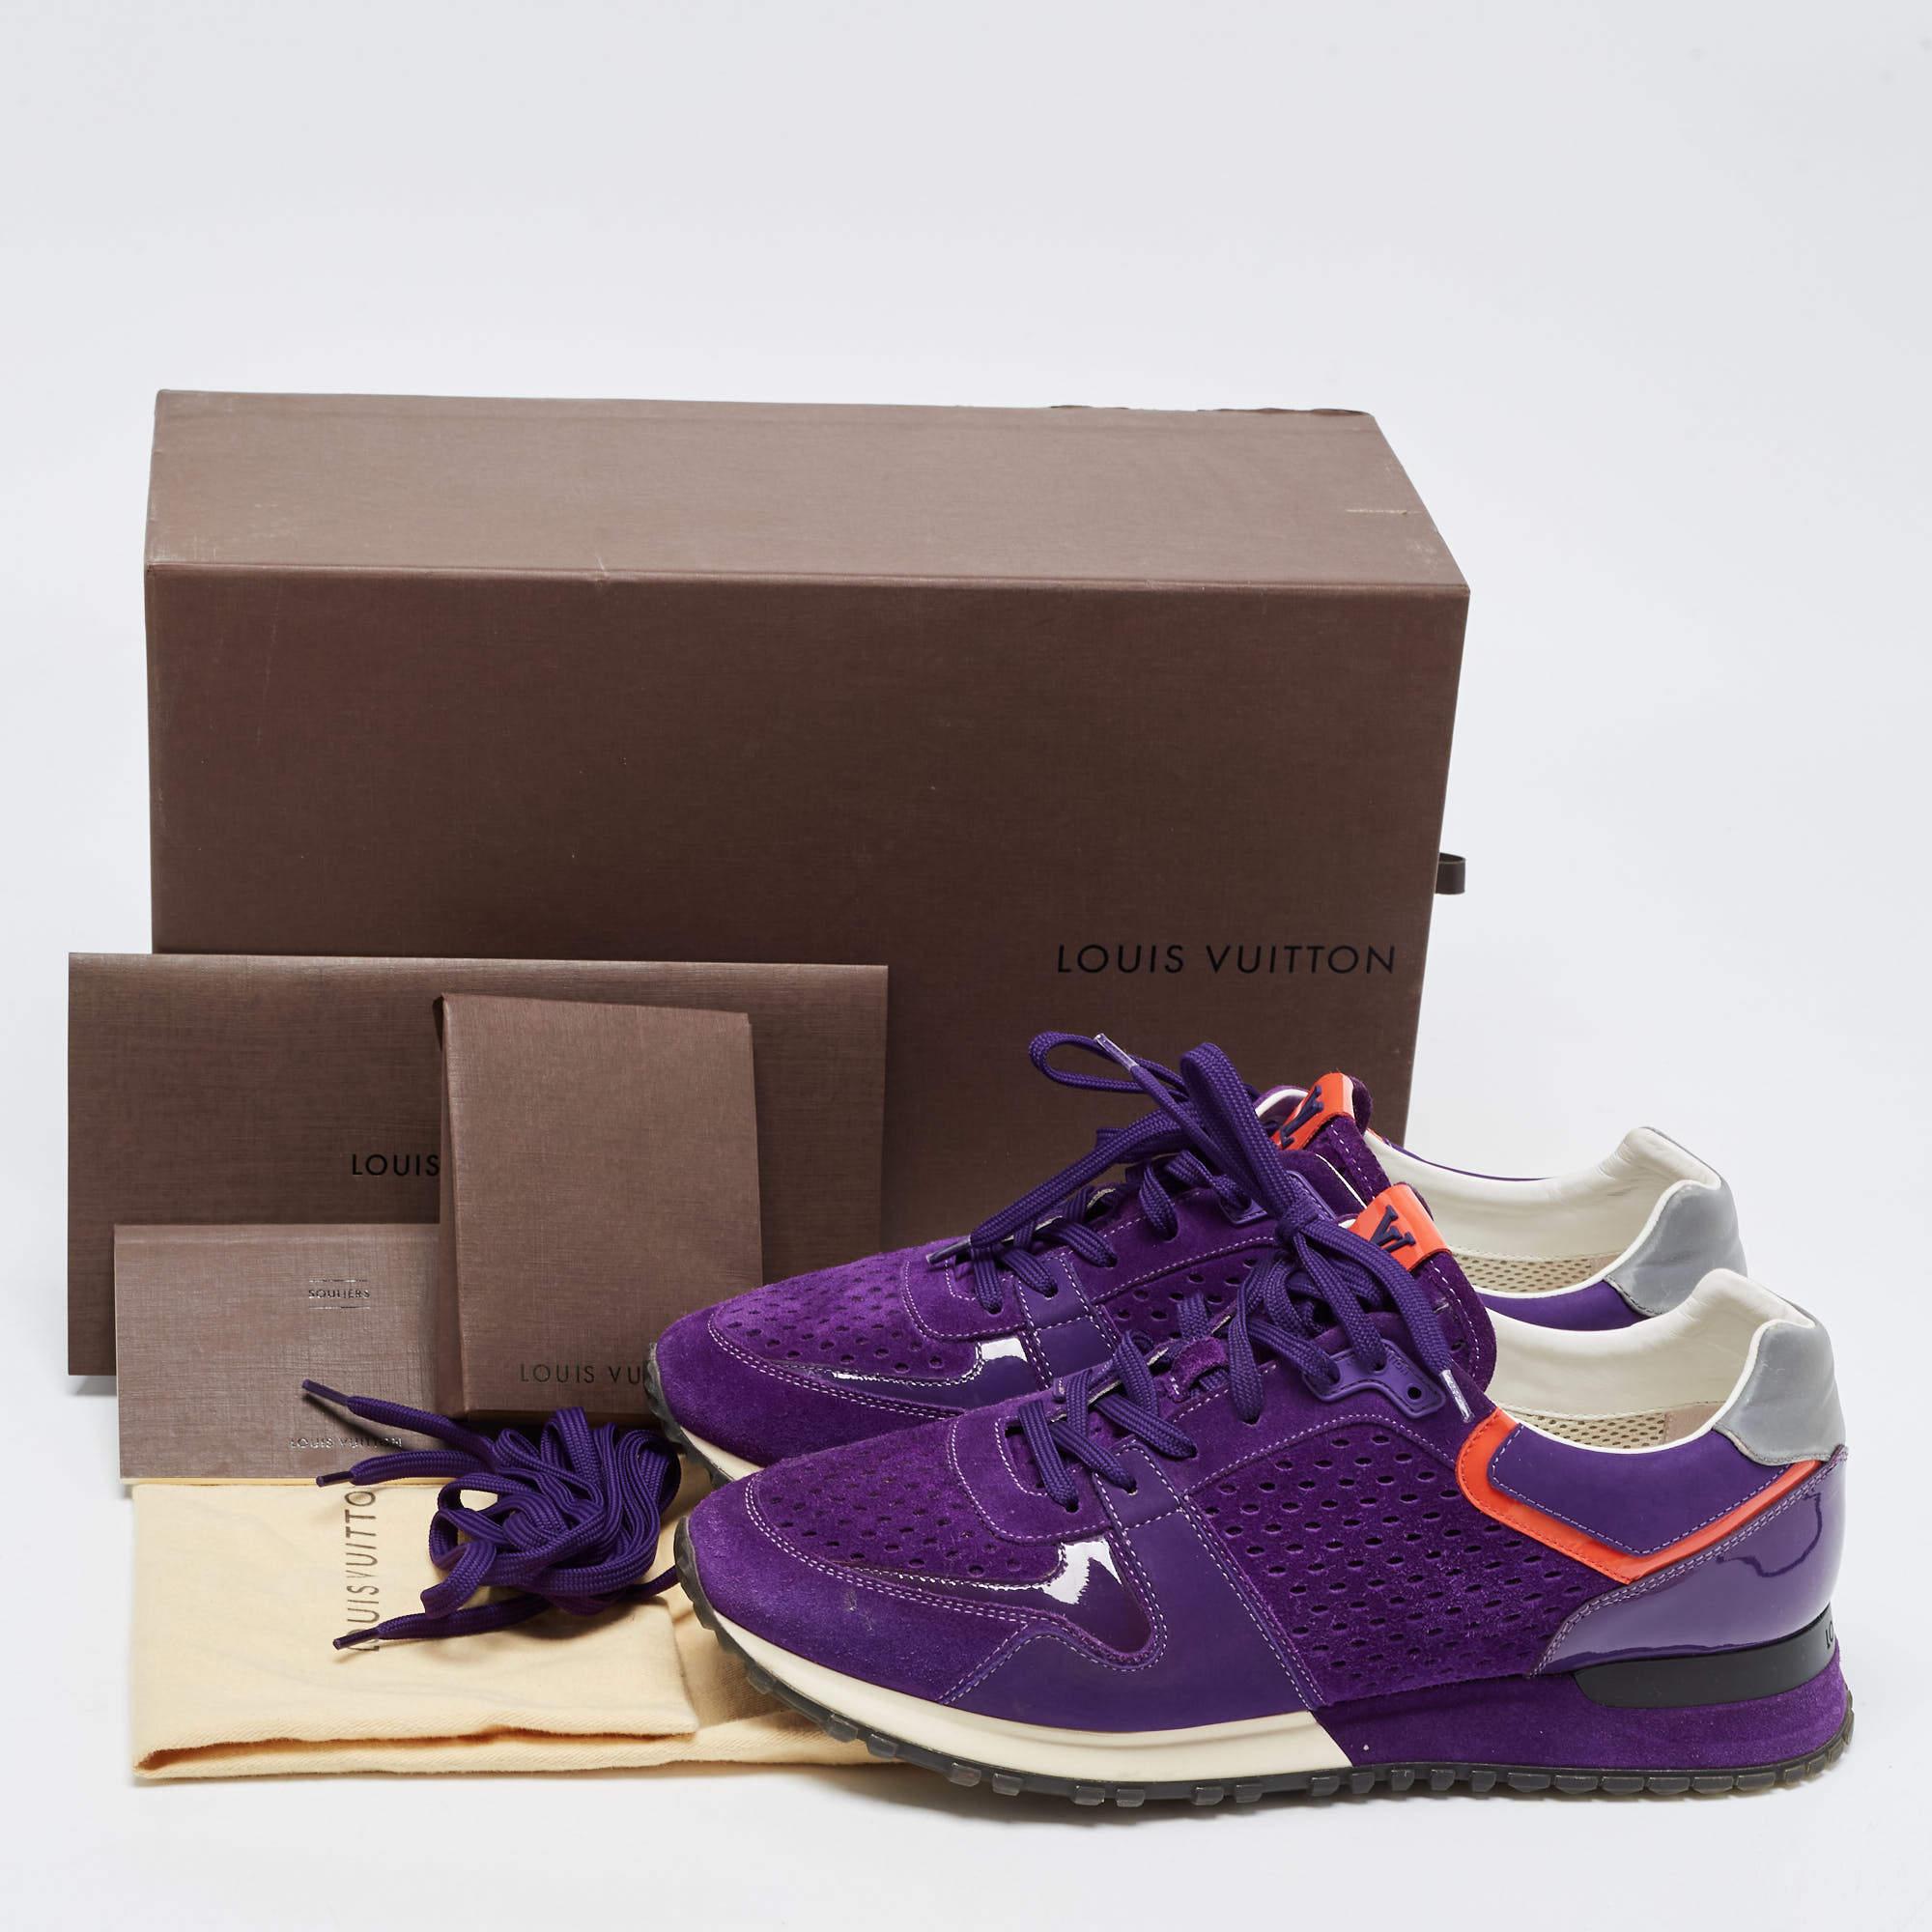 Louis Vuitton Purple Suede and Mesh Run Away Sneakers Size 40 5